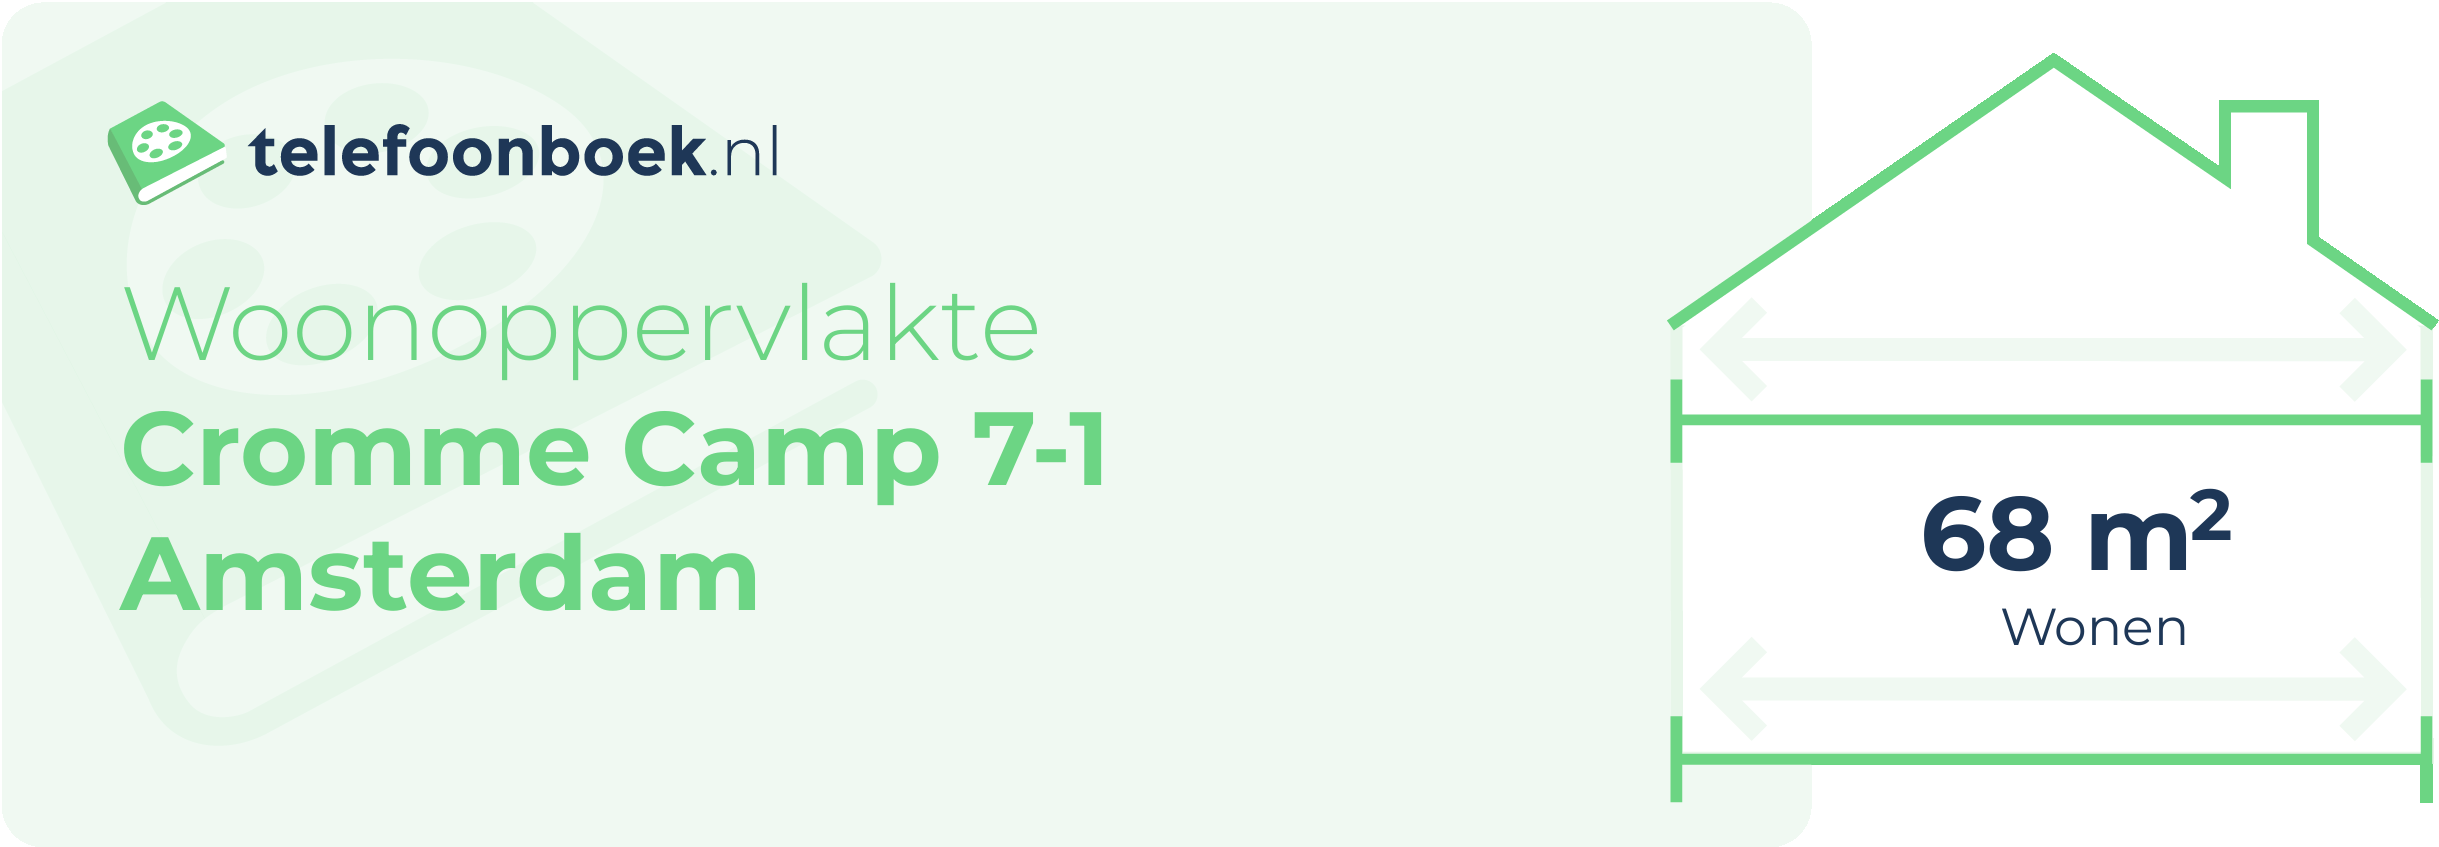 Woonoppervlakte Cromme Camp 7-1 Amsterdam